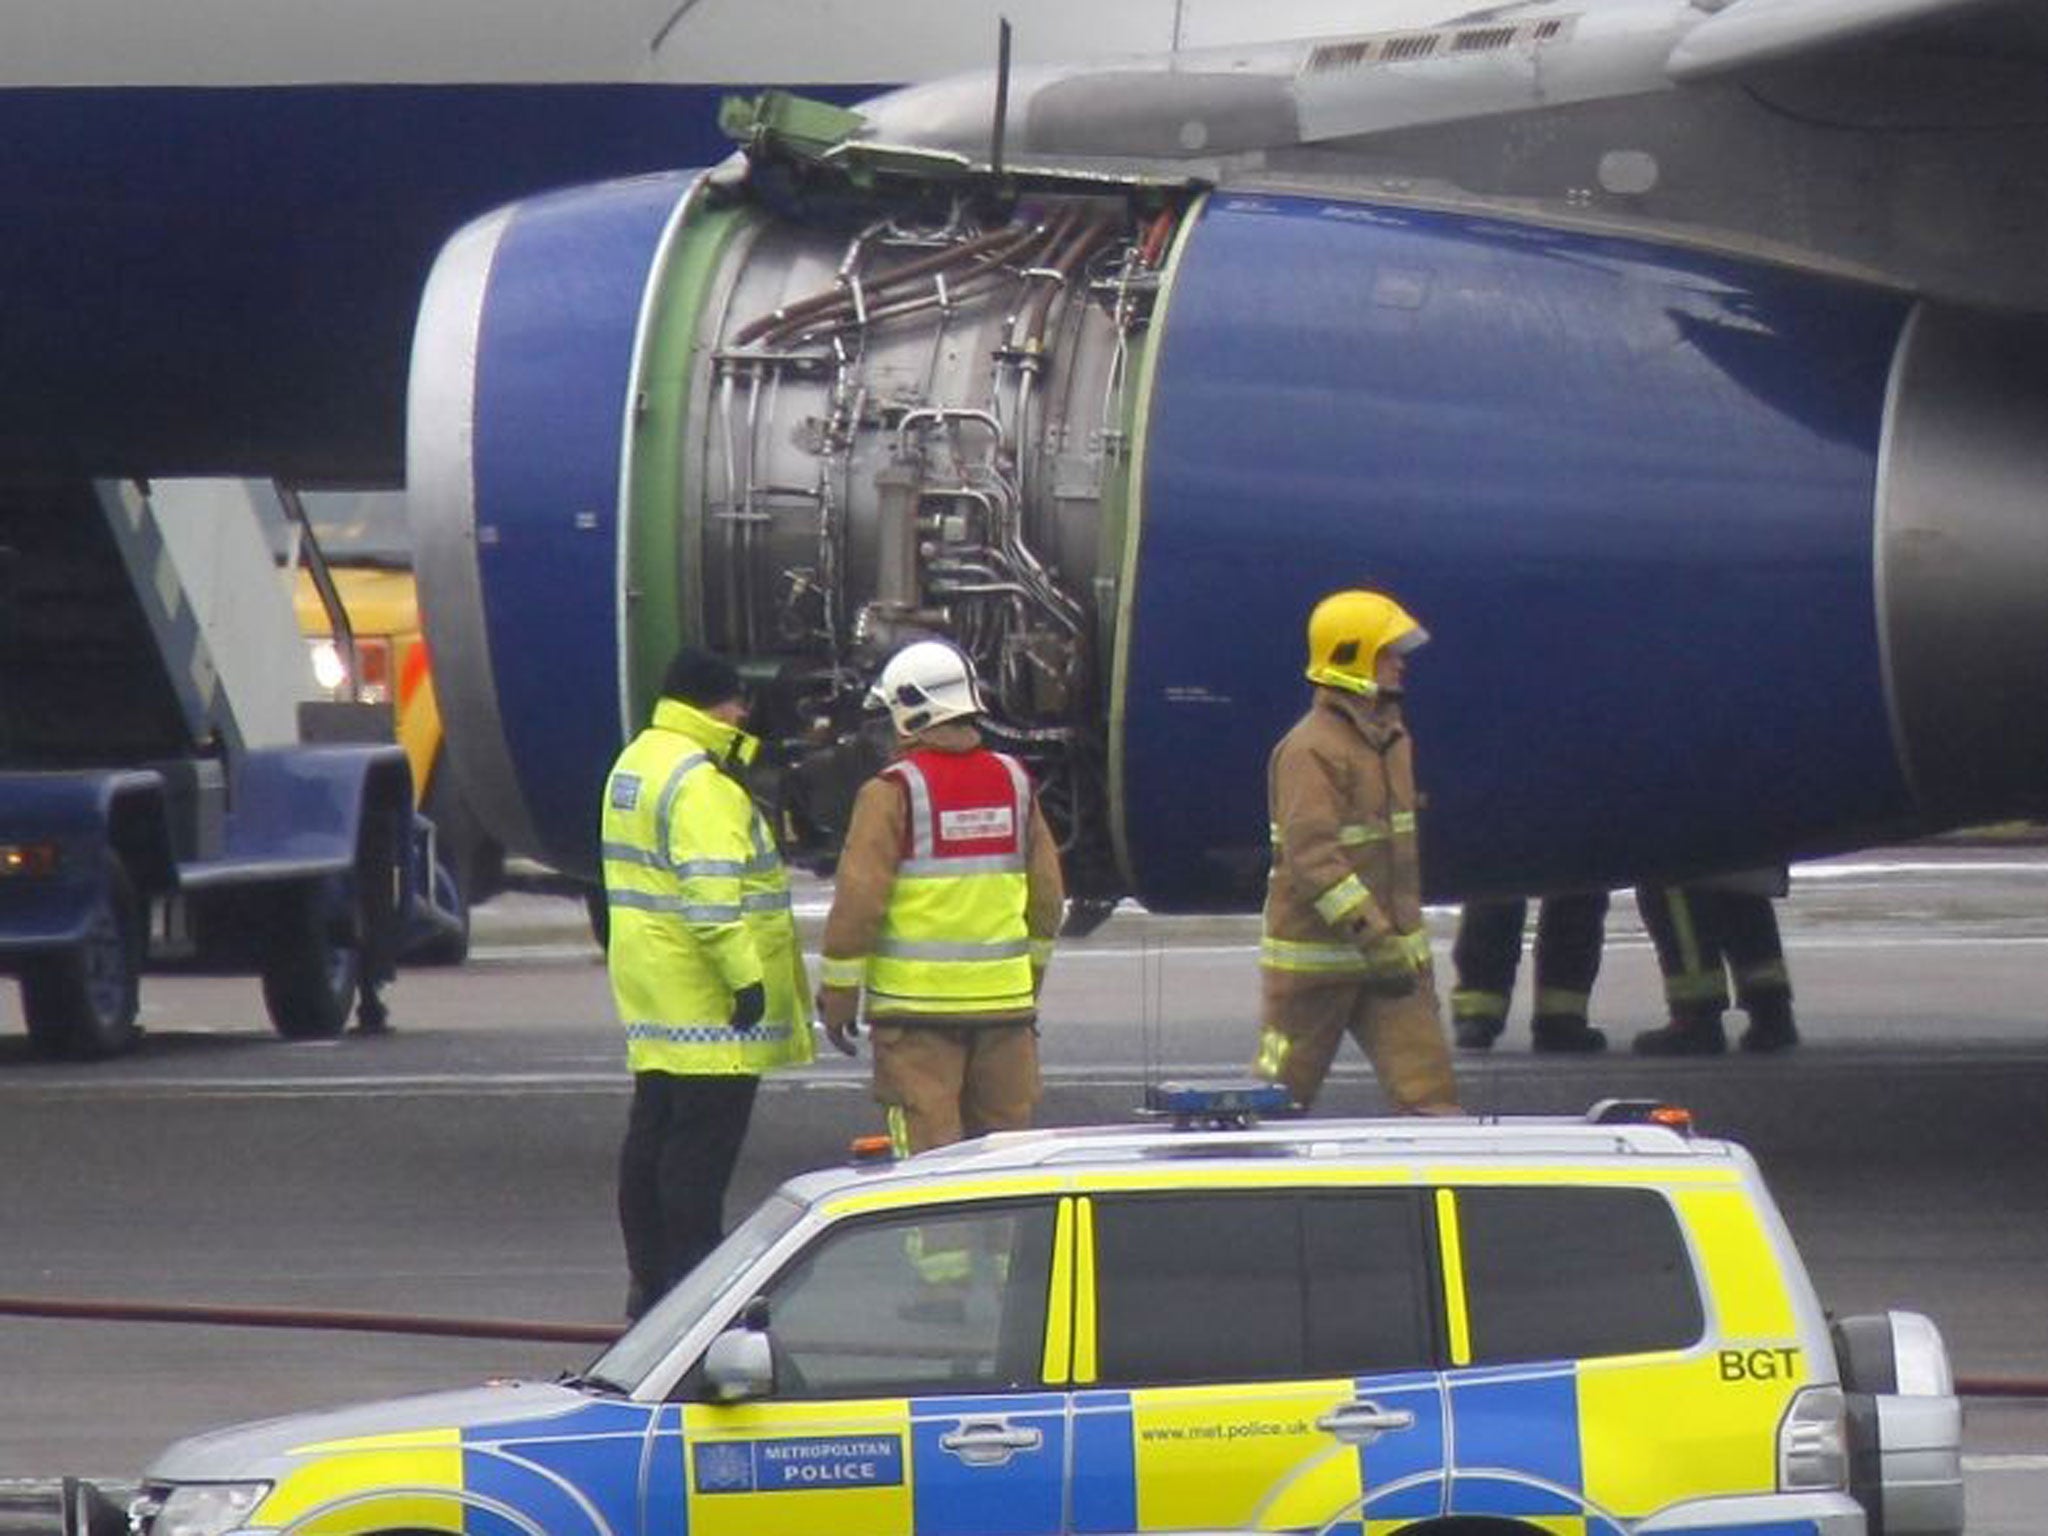 A British Airways flight BA762 surrounded by emergency vehicles after an emergency landing at Heathrow airport